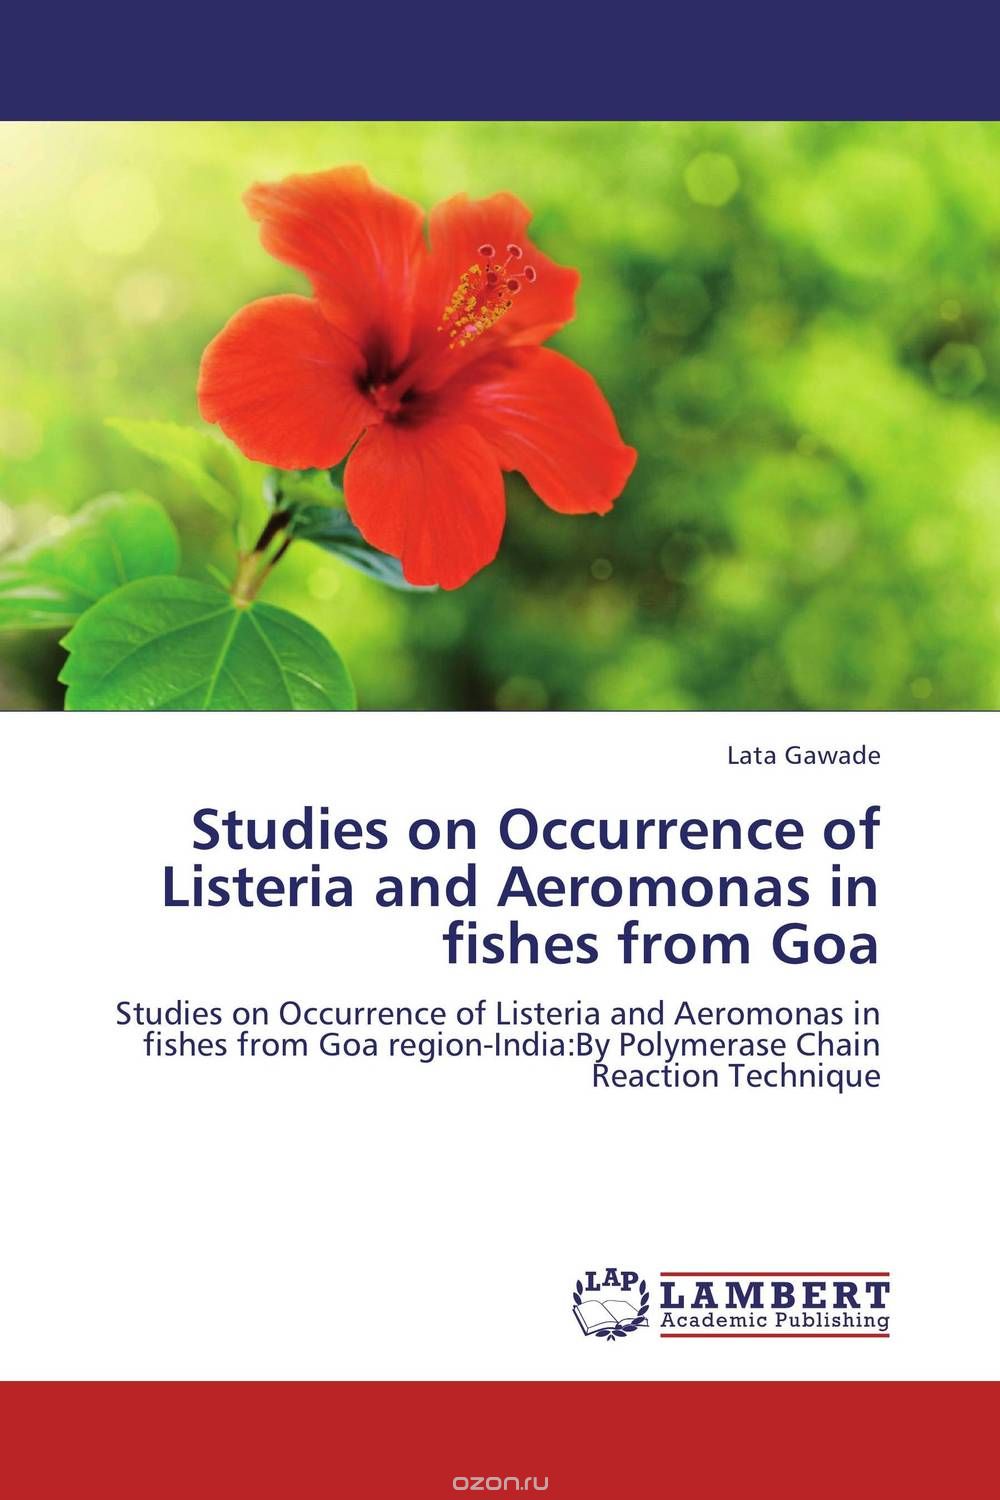 Studies on Occurrence of Listeria and Aeromonas in fishes from Goa